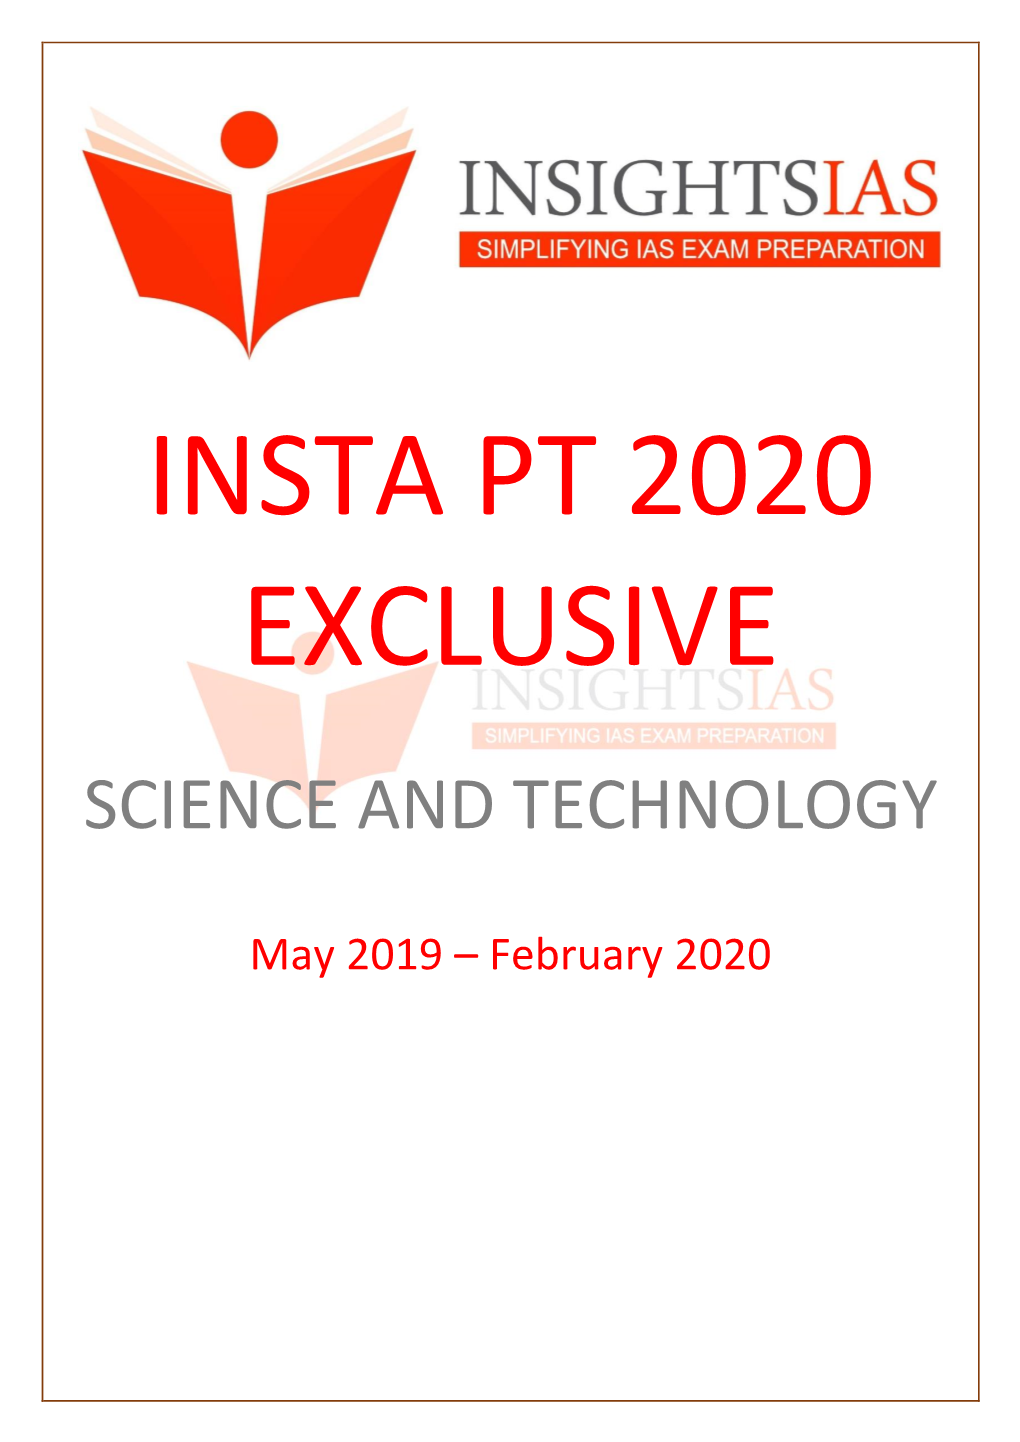 Insights Pt 2020 Exclusive (Science and Technology)